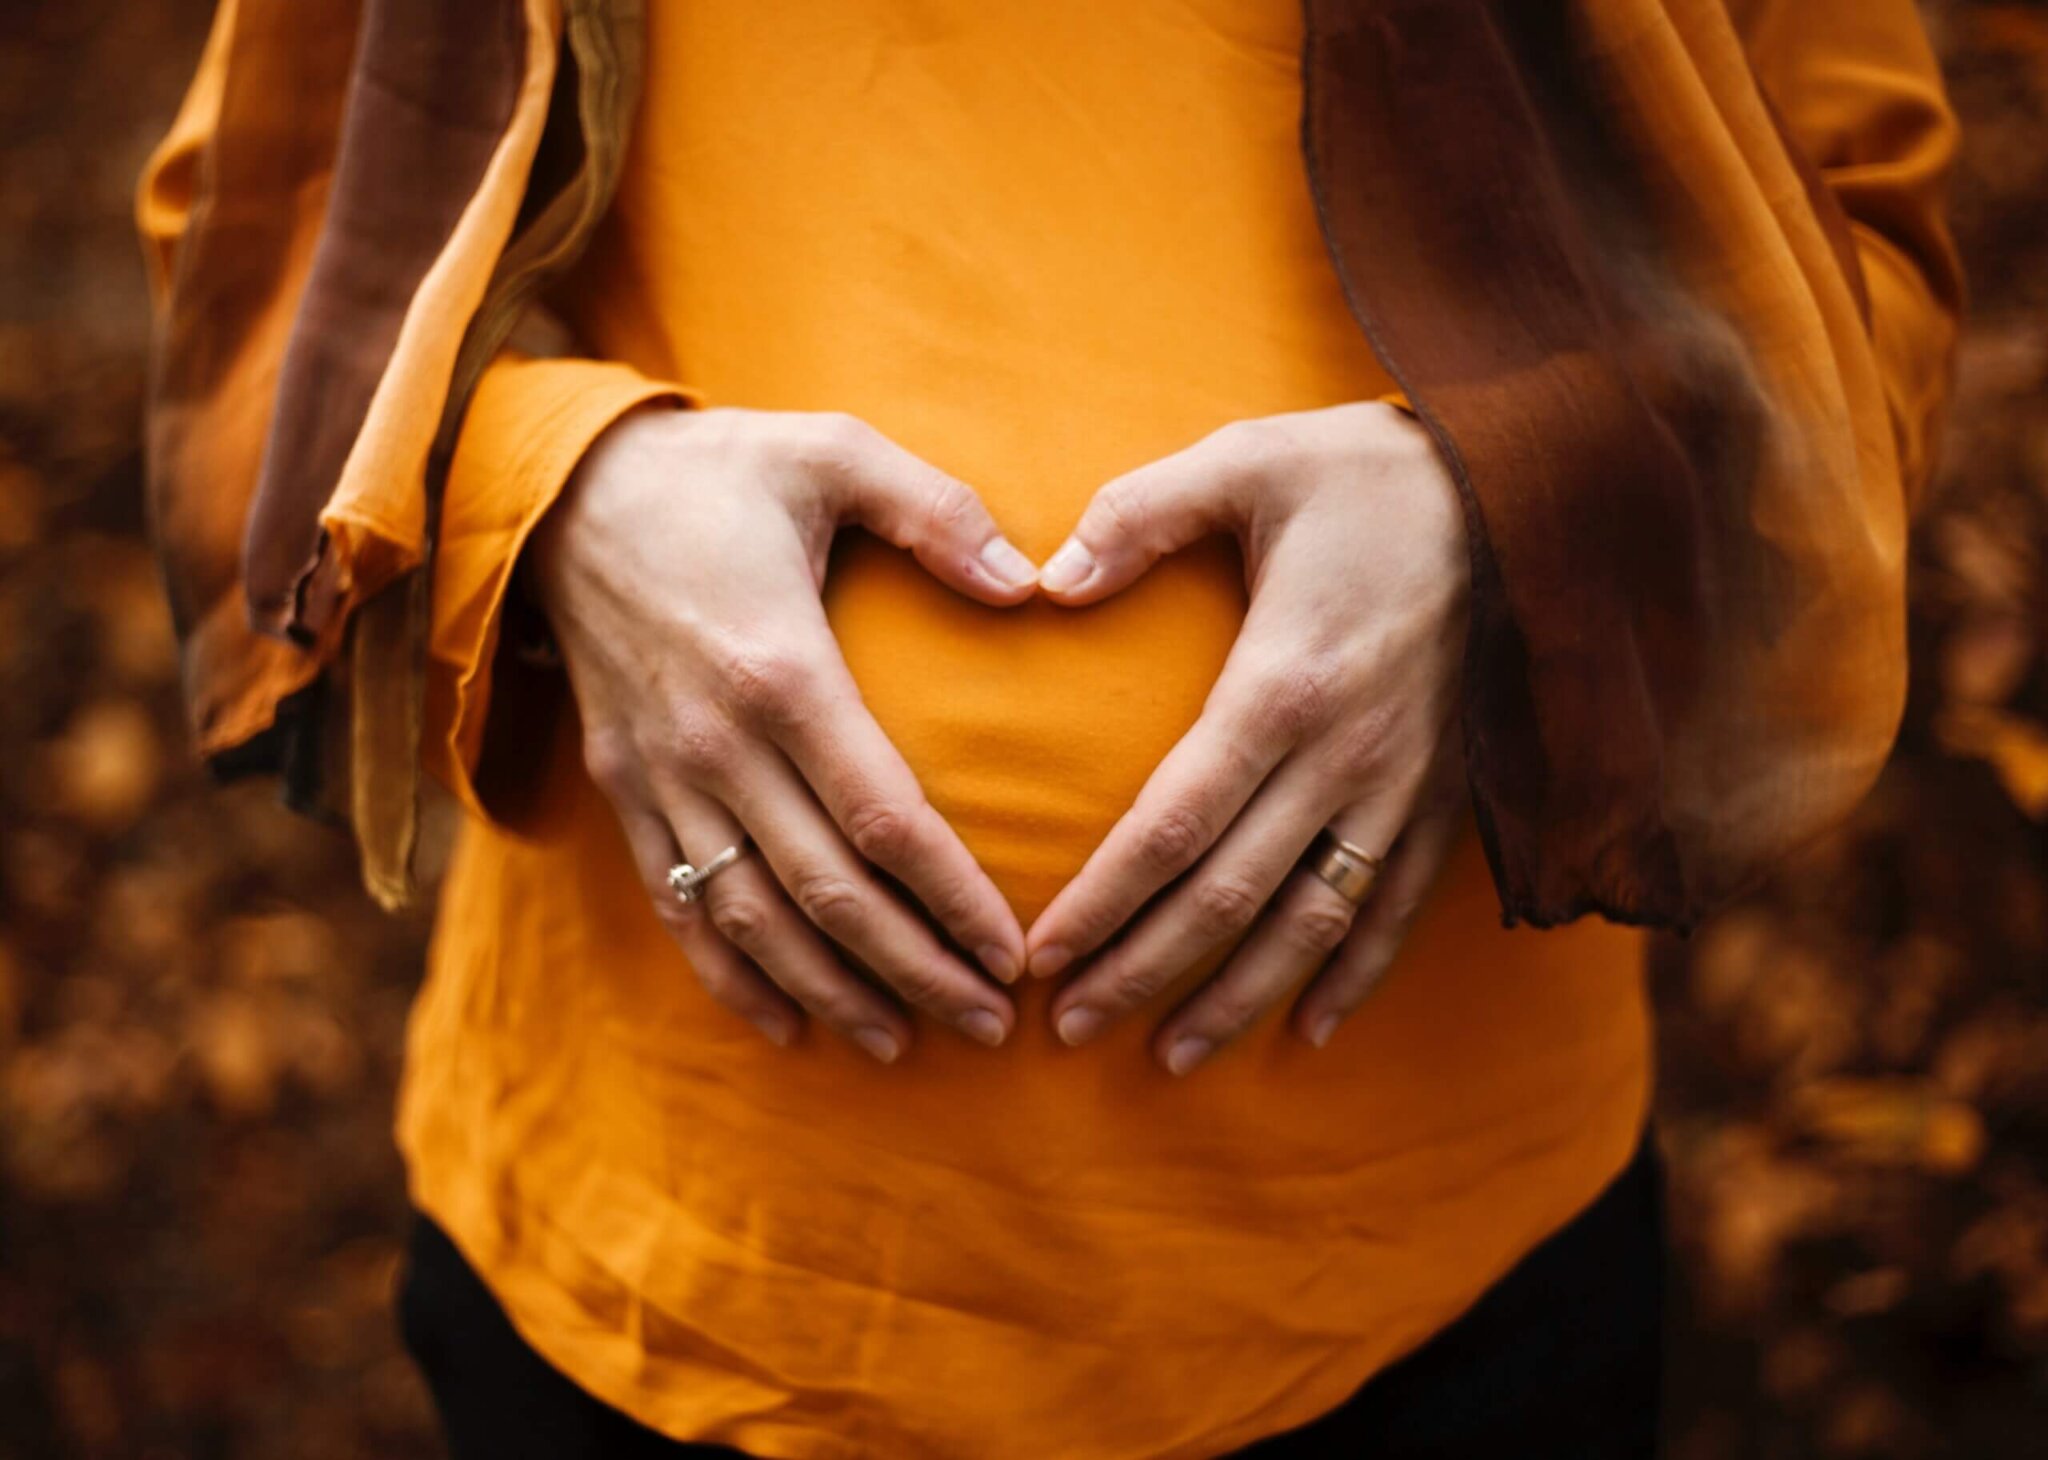 pregnant woman with orange shirt making a heart shape with her hands over her belly